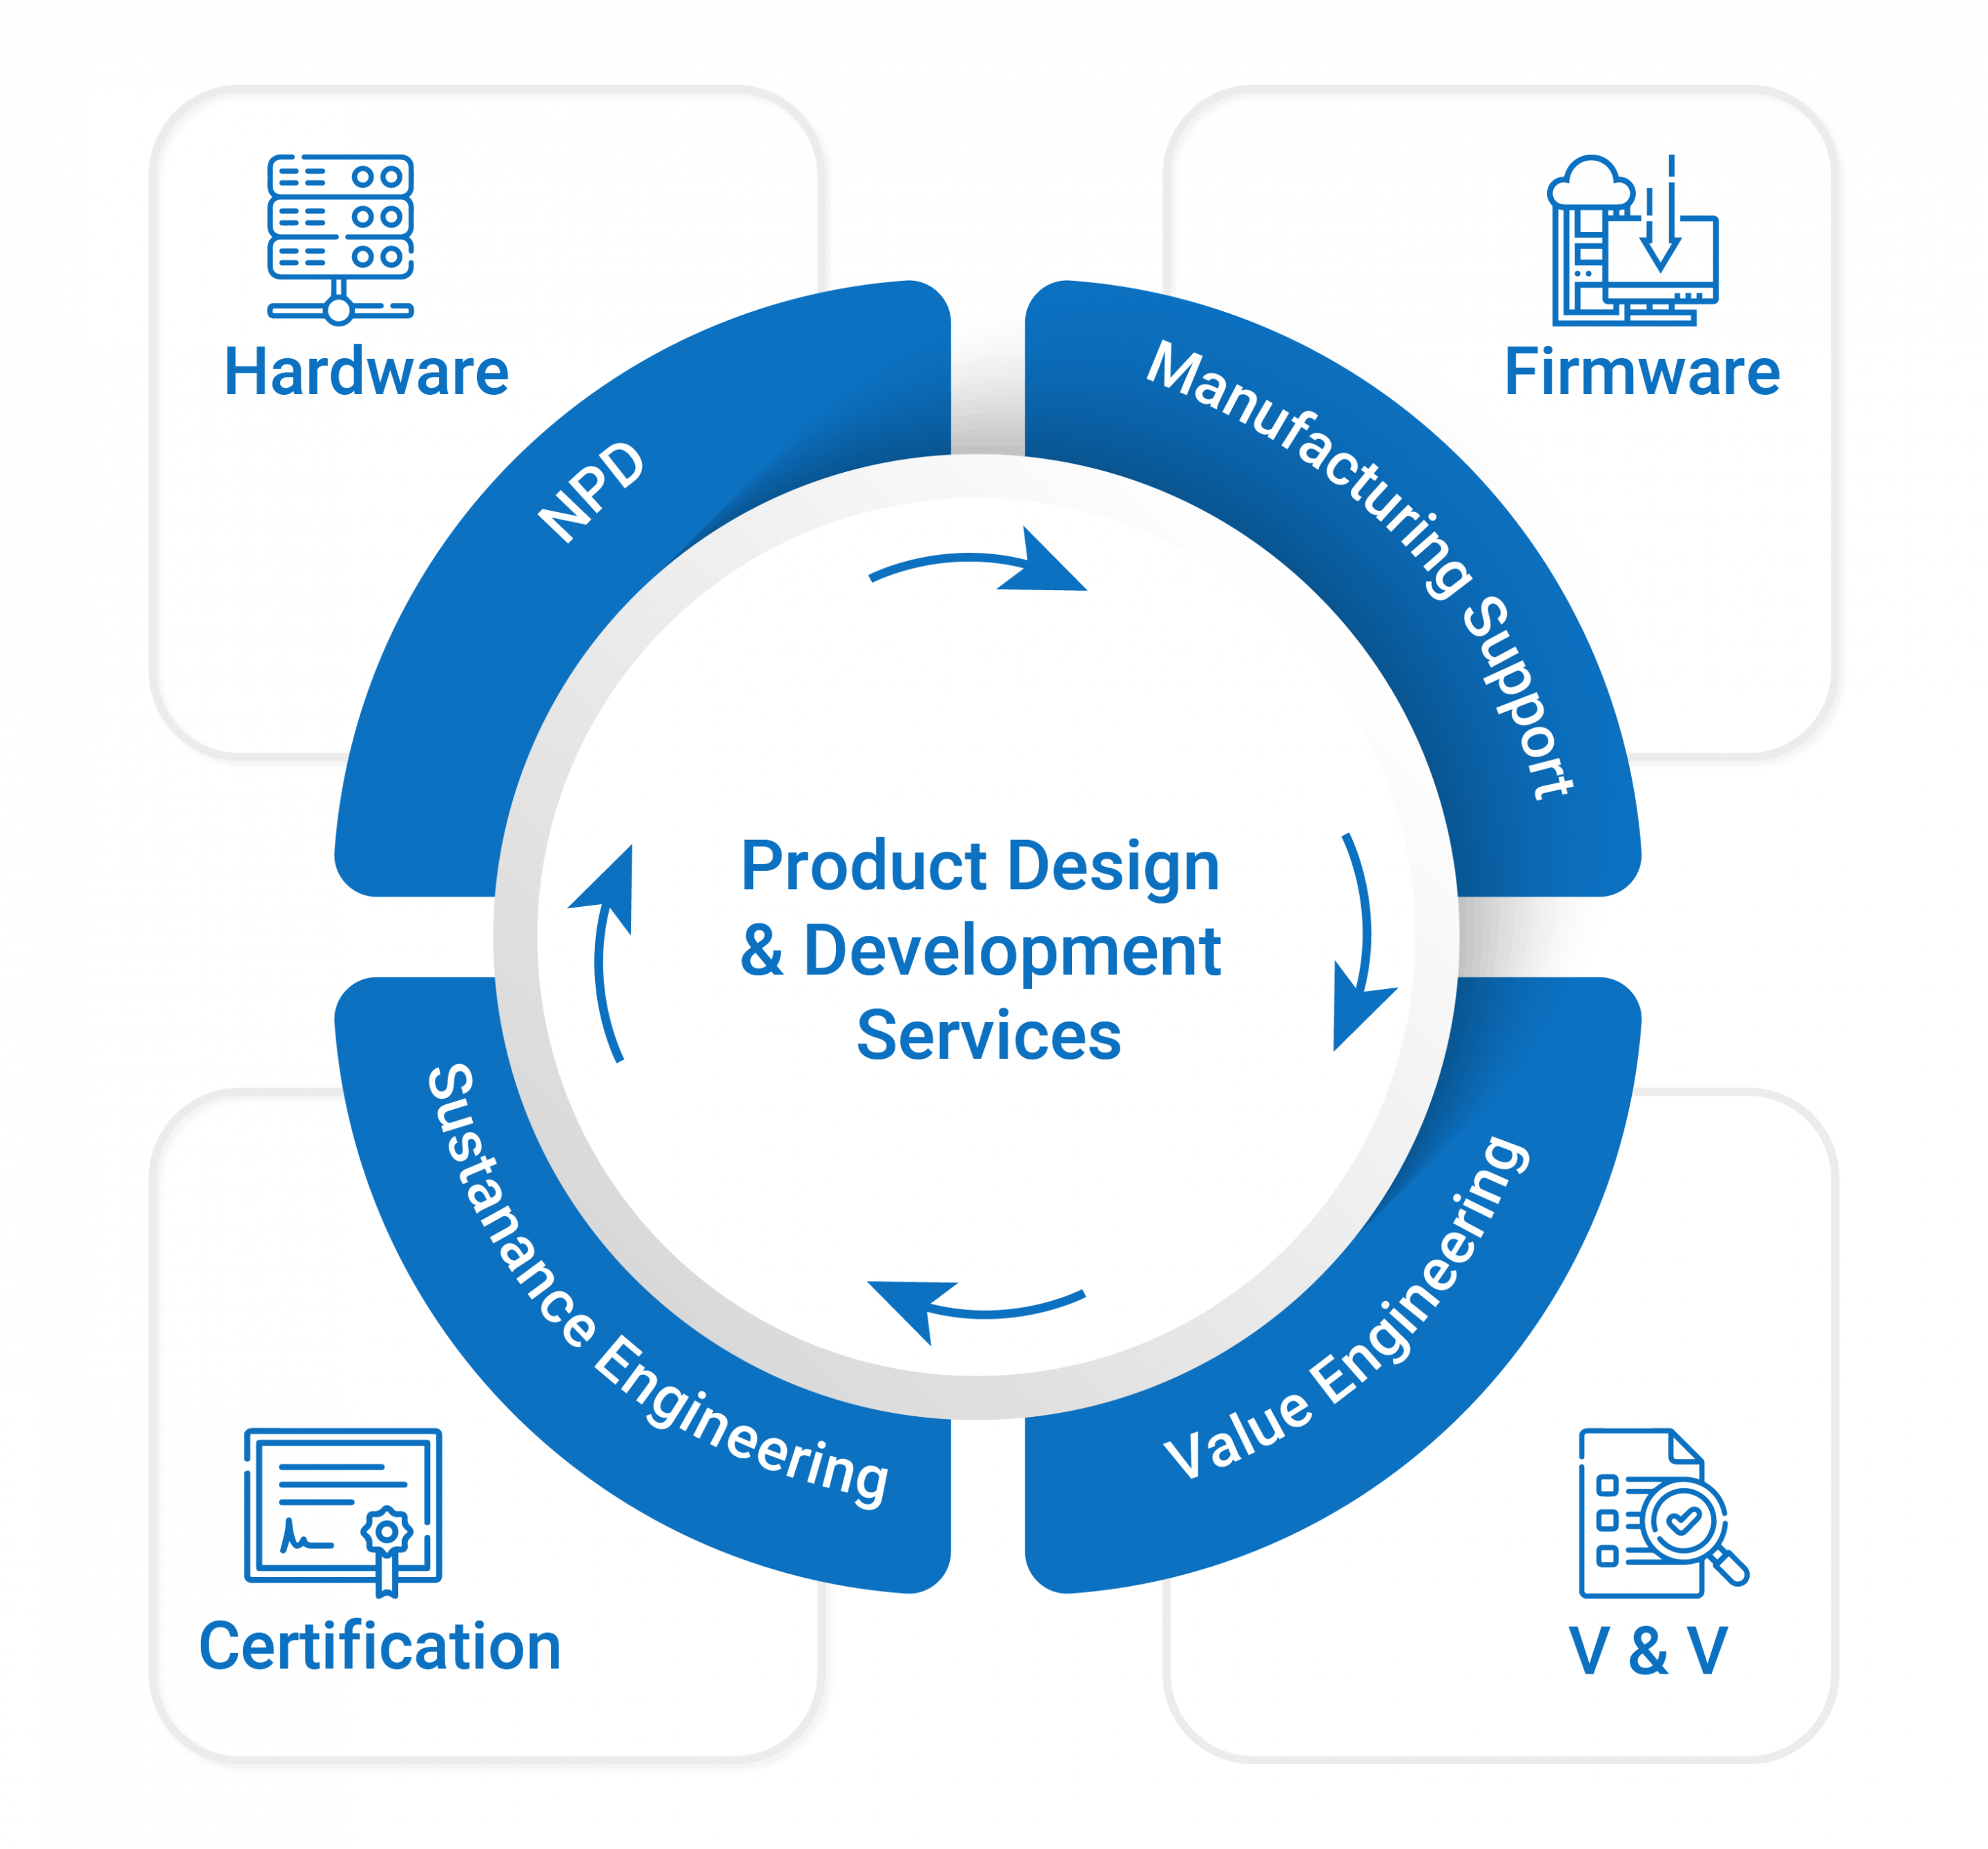 product engineering services